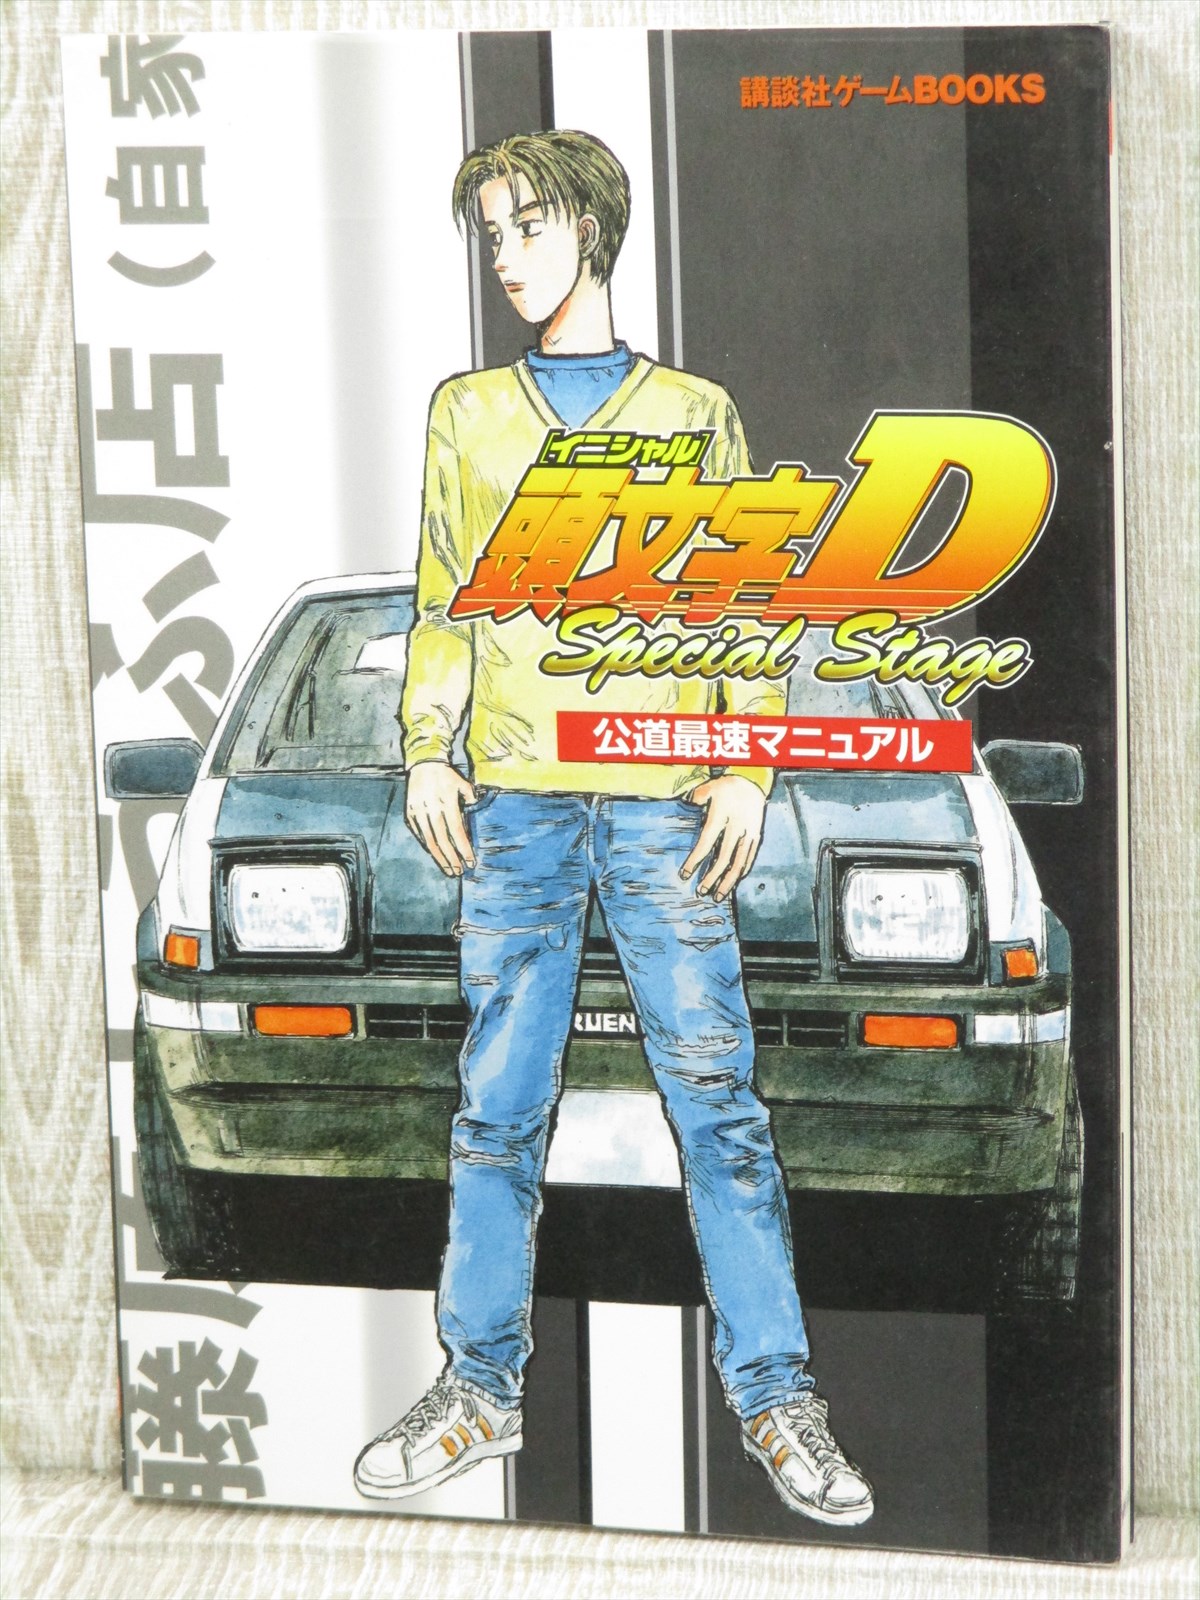 Initial D Special Stage Guide Manual Ps2 Book Ko19 Ebay